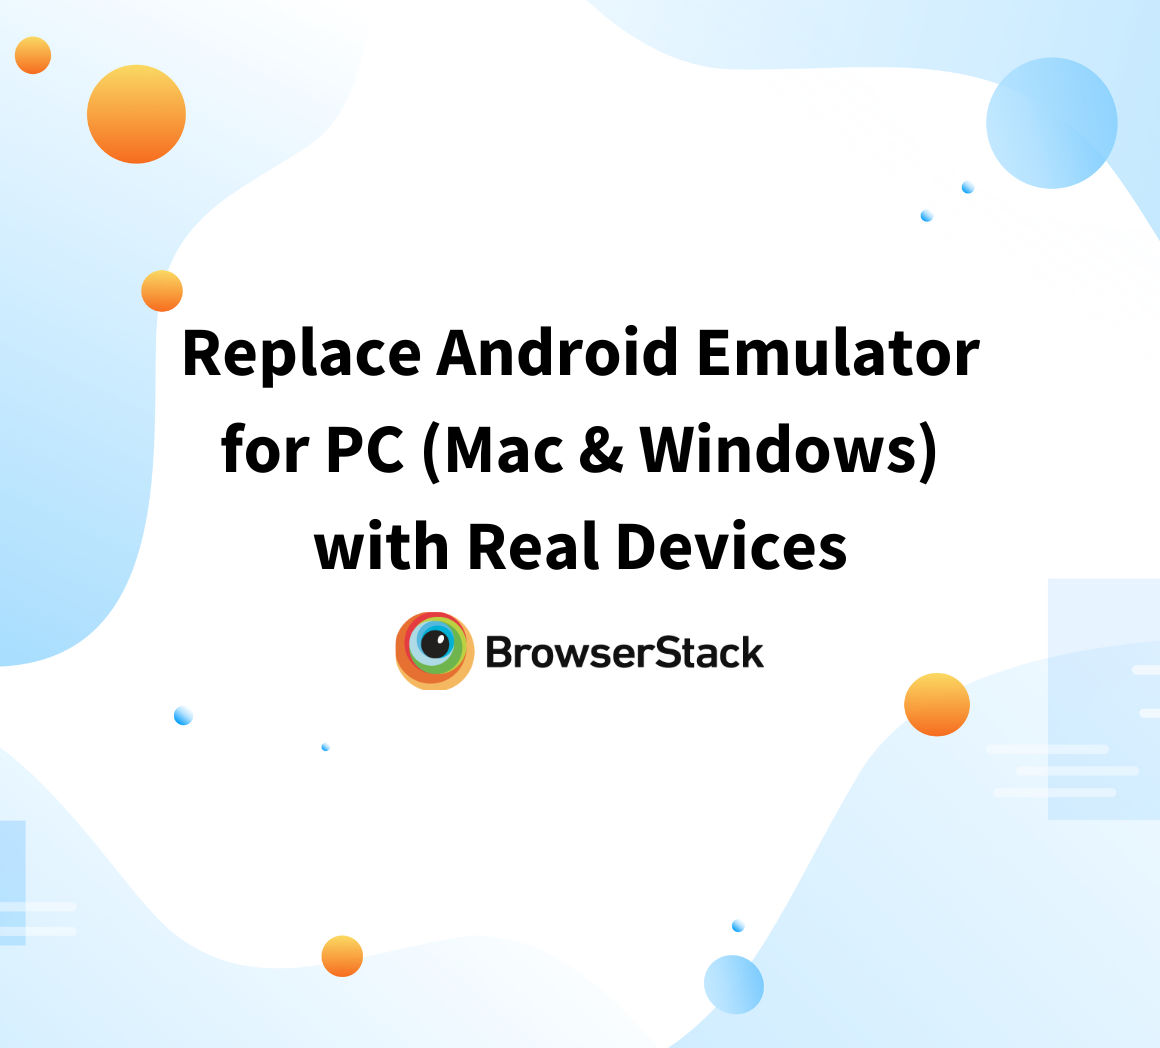 Replace Android Emulator for PC (Mac & Windows) with Real Devices